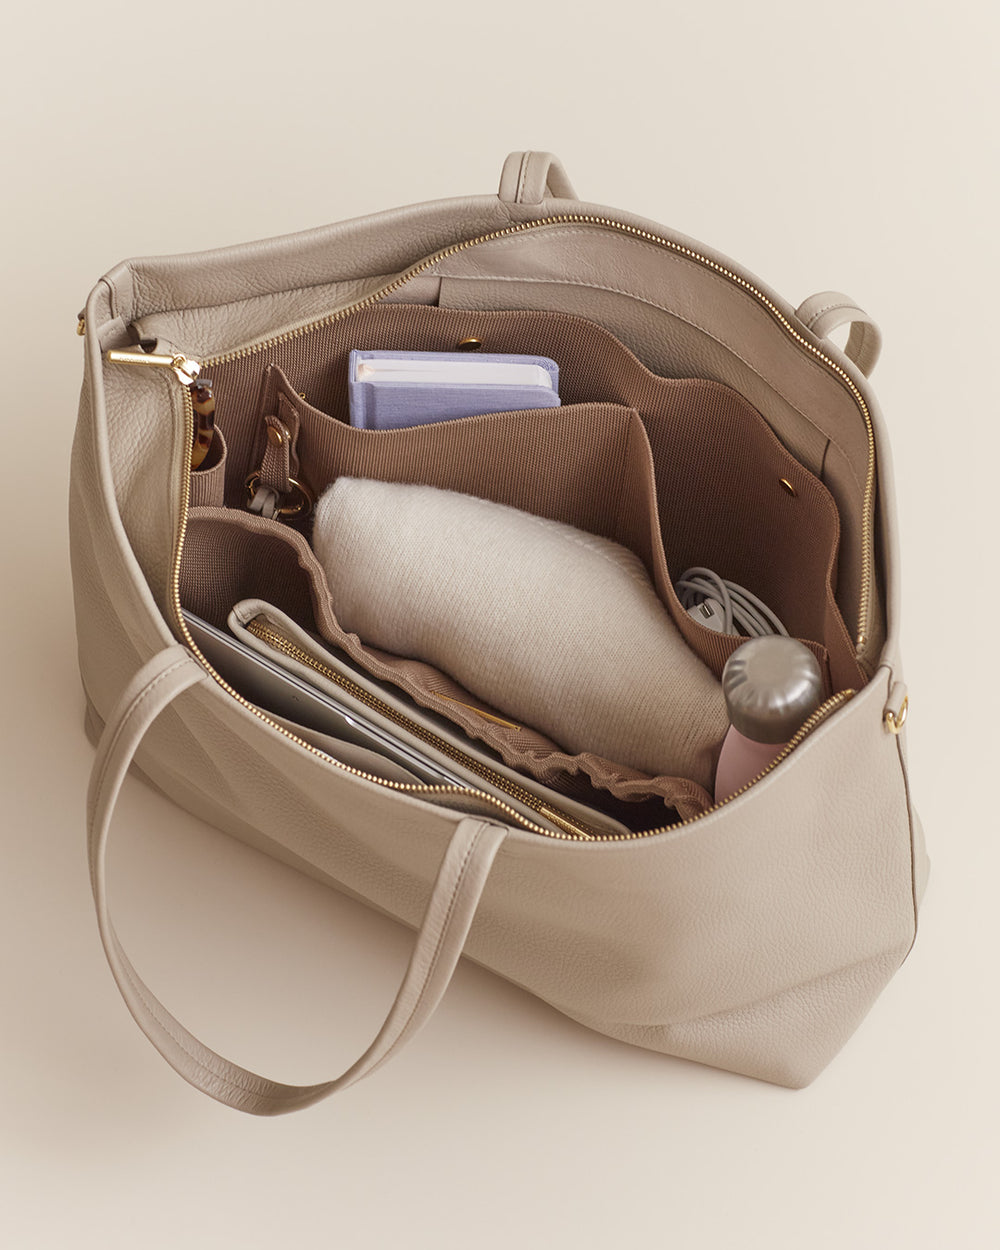 Open handbag with various items inside like a scarf, notebook, and sunglasses.